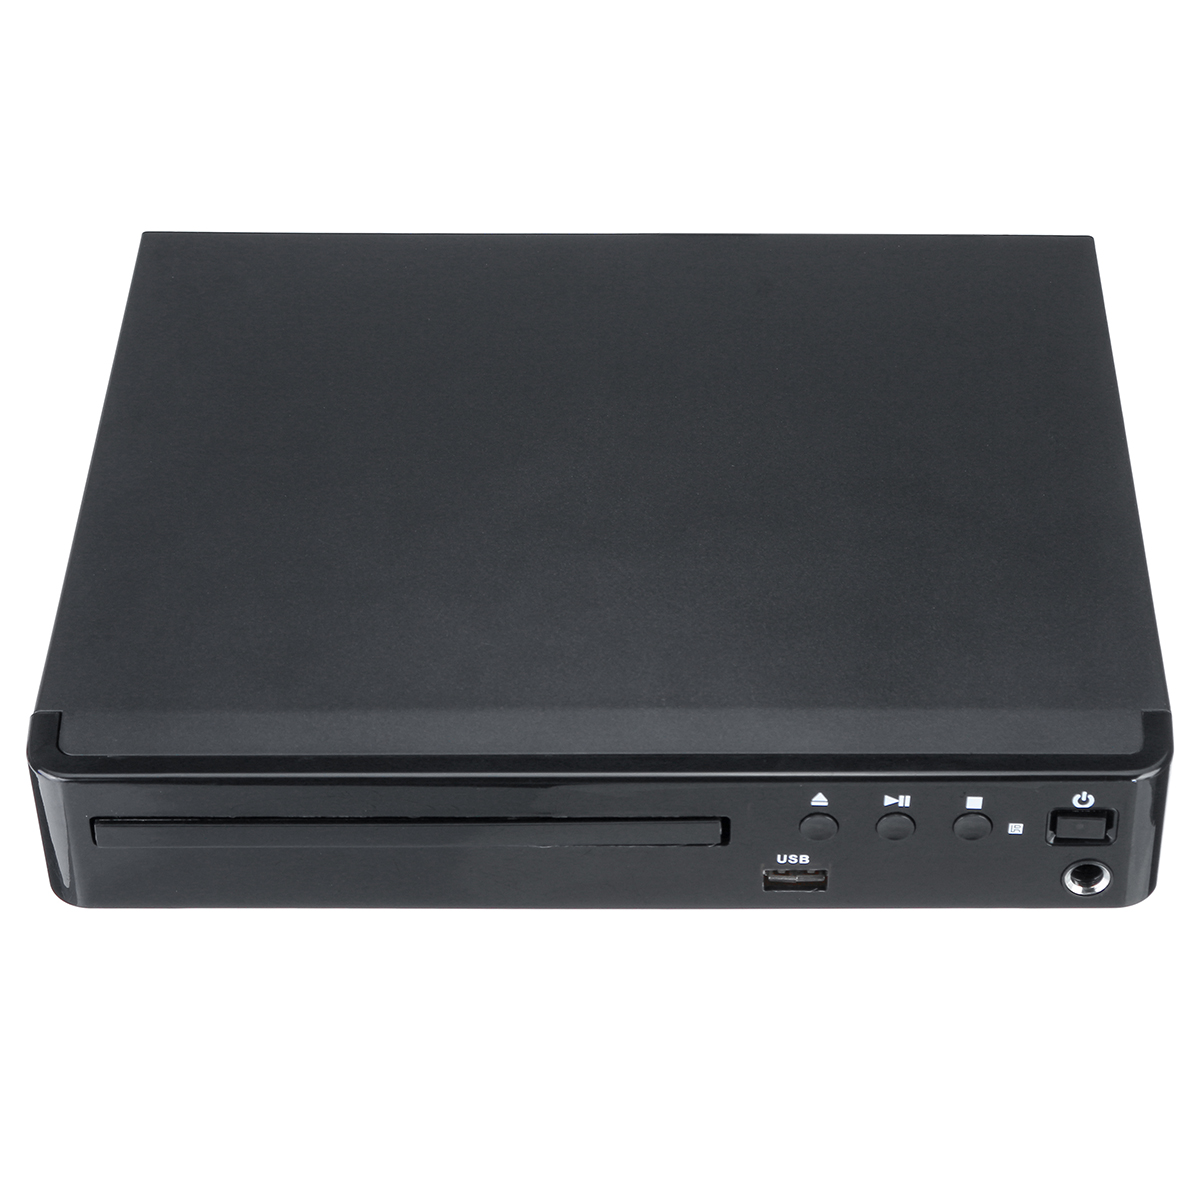 1080P-Full-HD-LCD-DVD-Player-Compact-6-Region-Stereo-Video-MP4-MP3-CD-USB-Remote-1699901-2